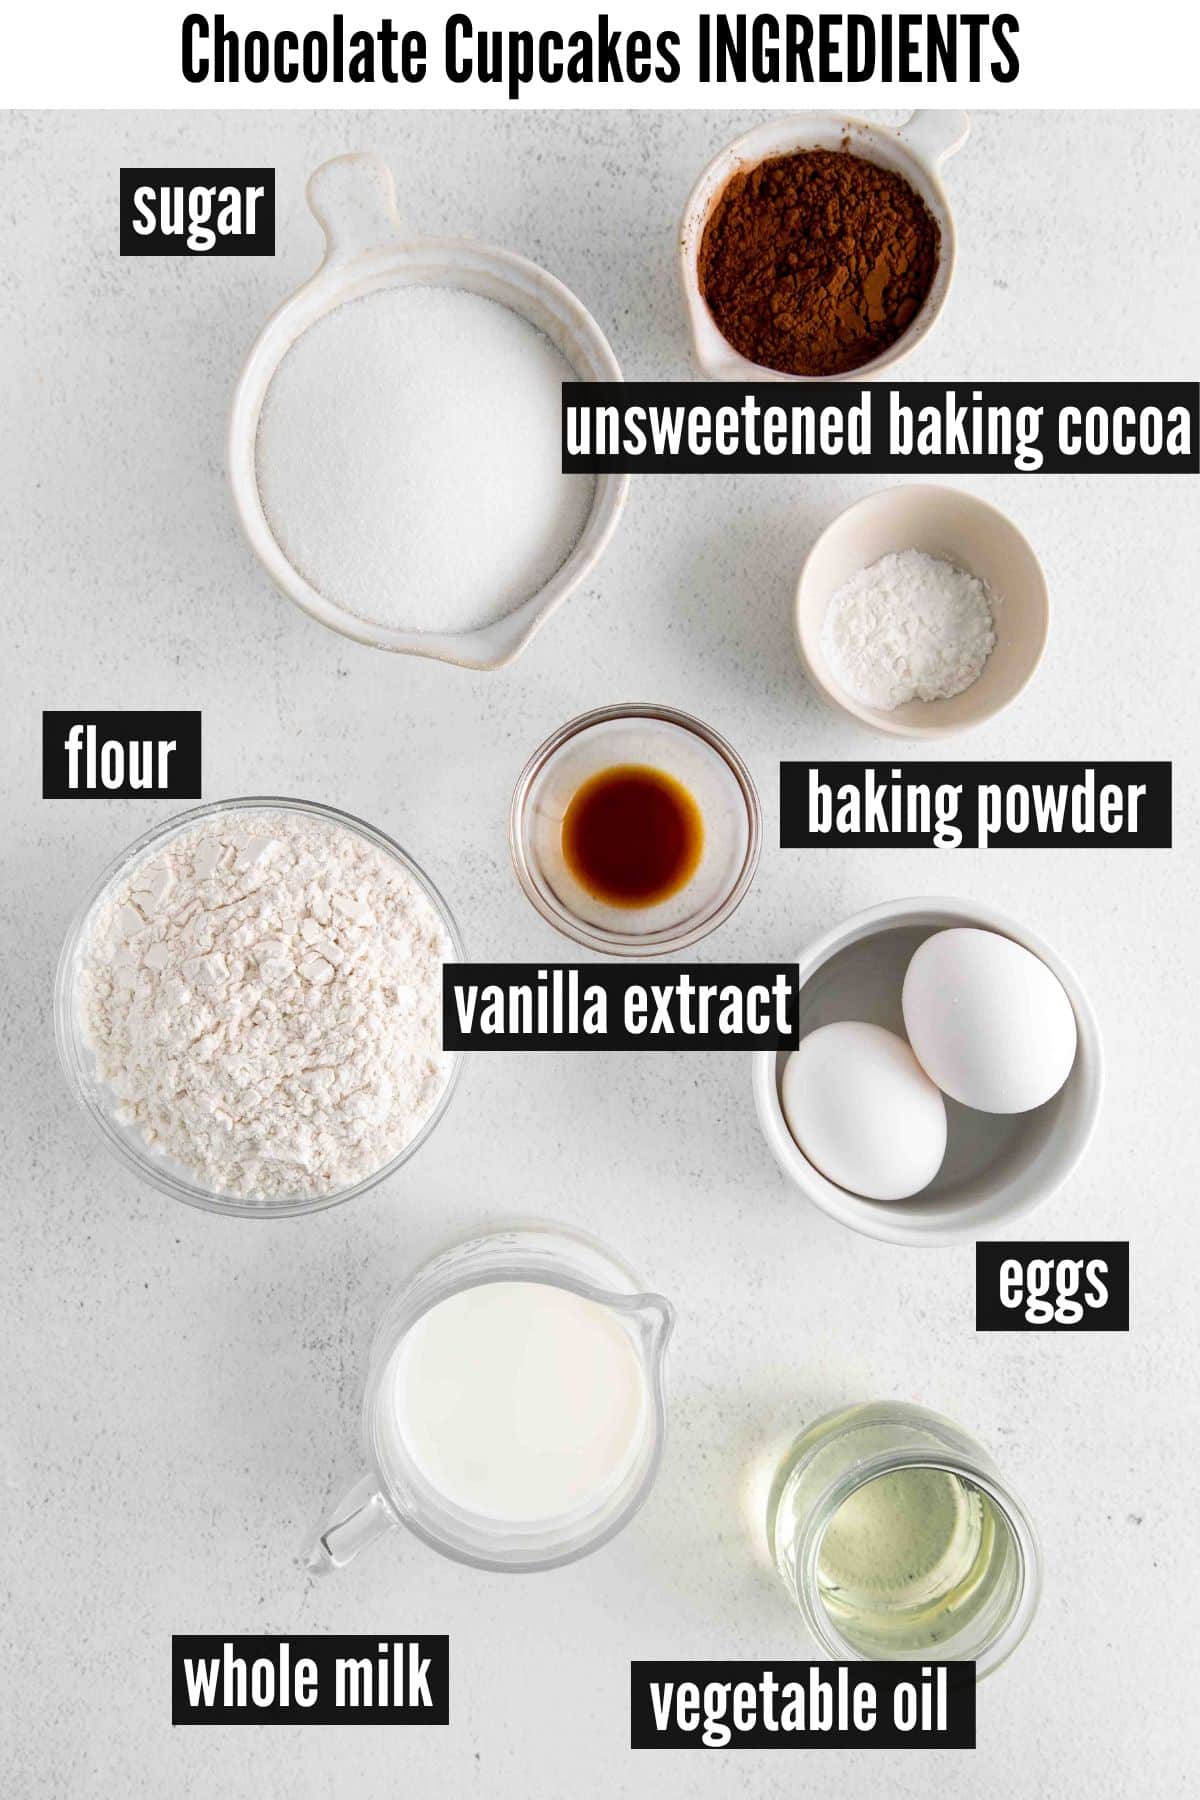 chocolate cupcakes labelled ingredients.